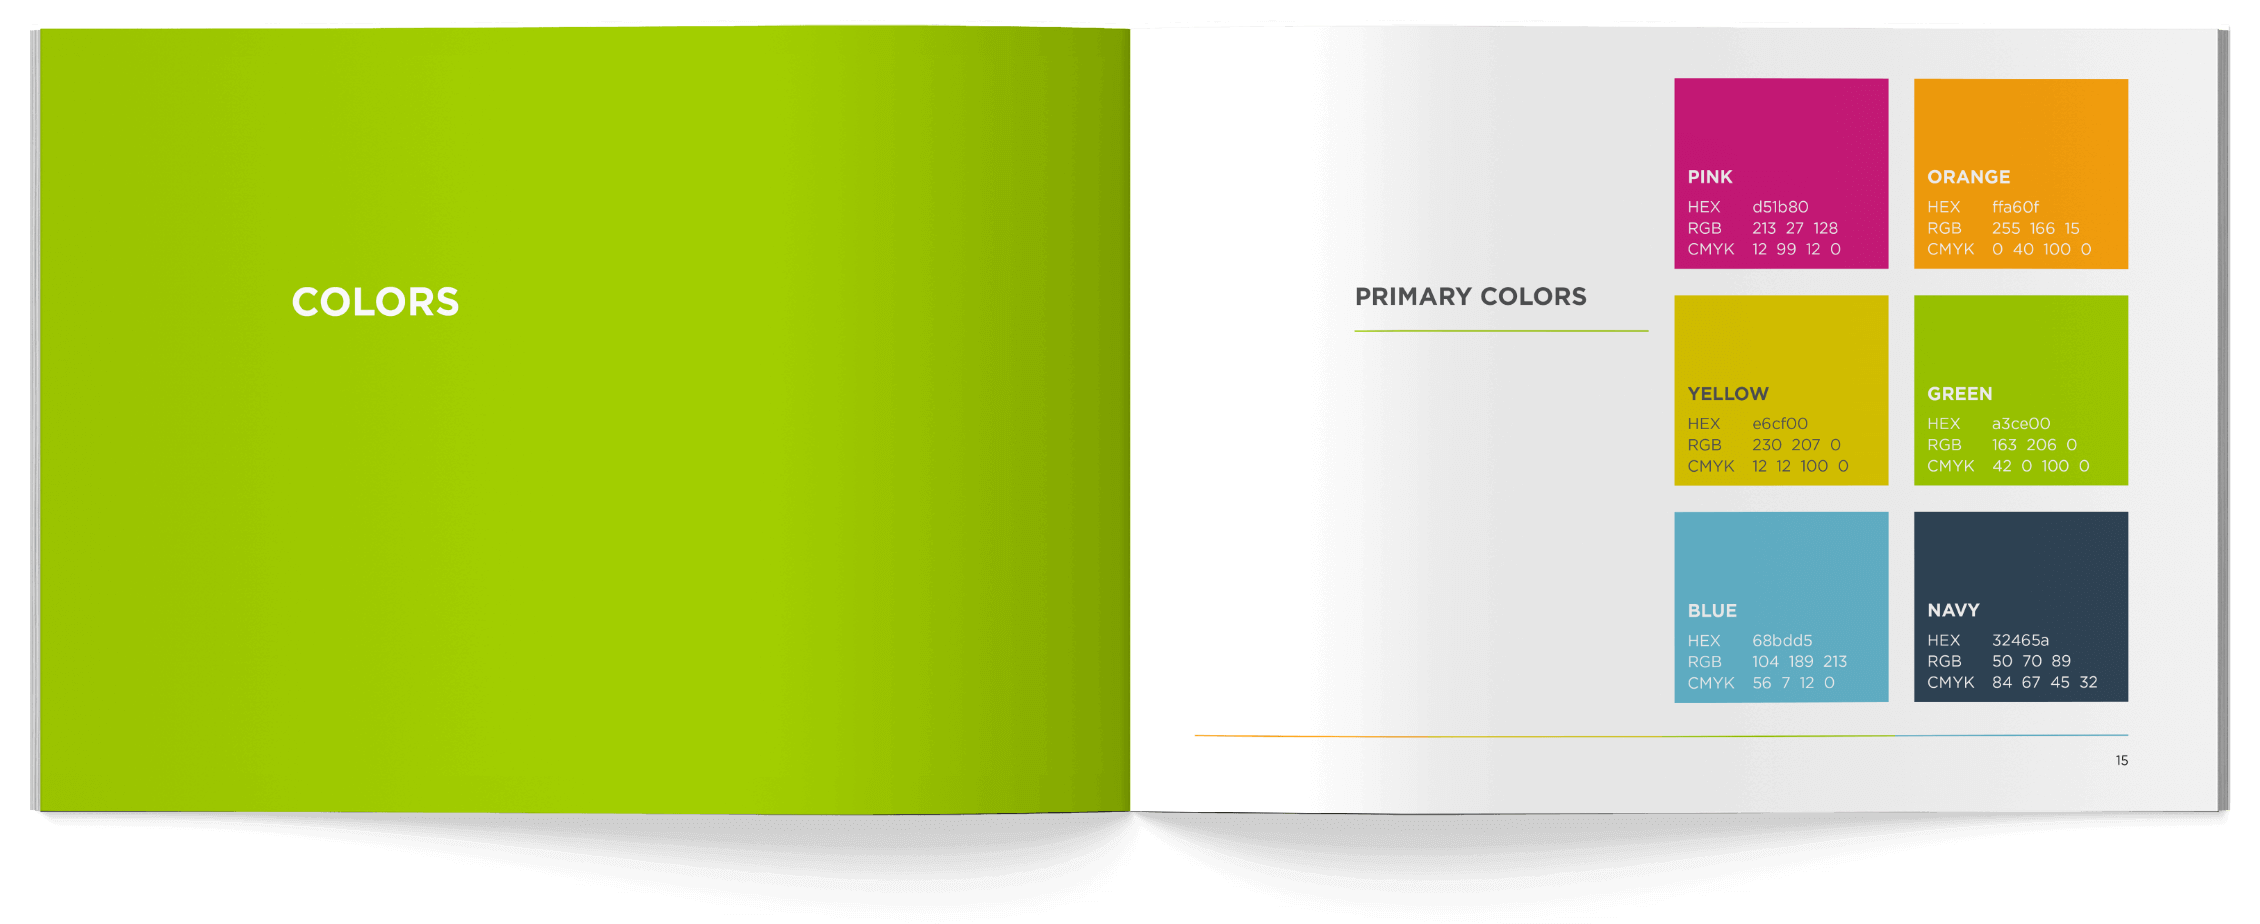 Color pages of the Pretty Instant brand book